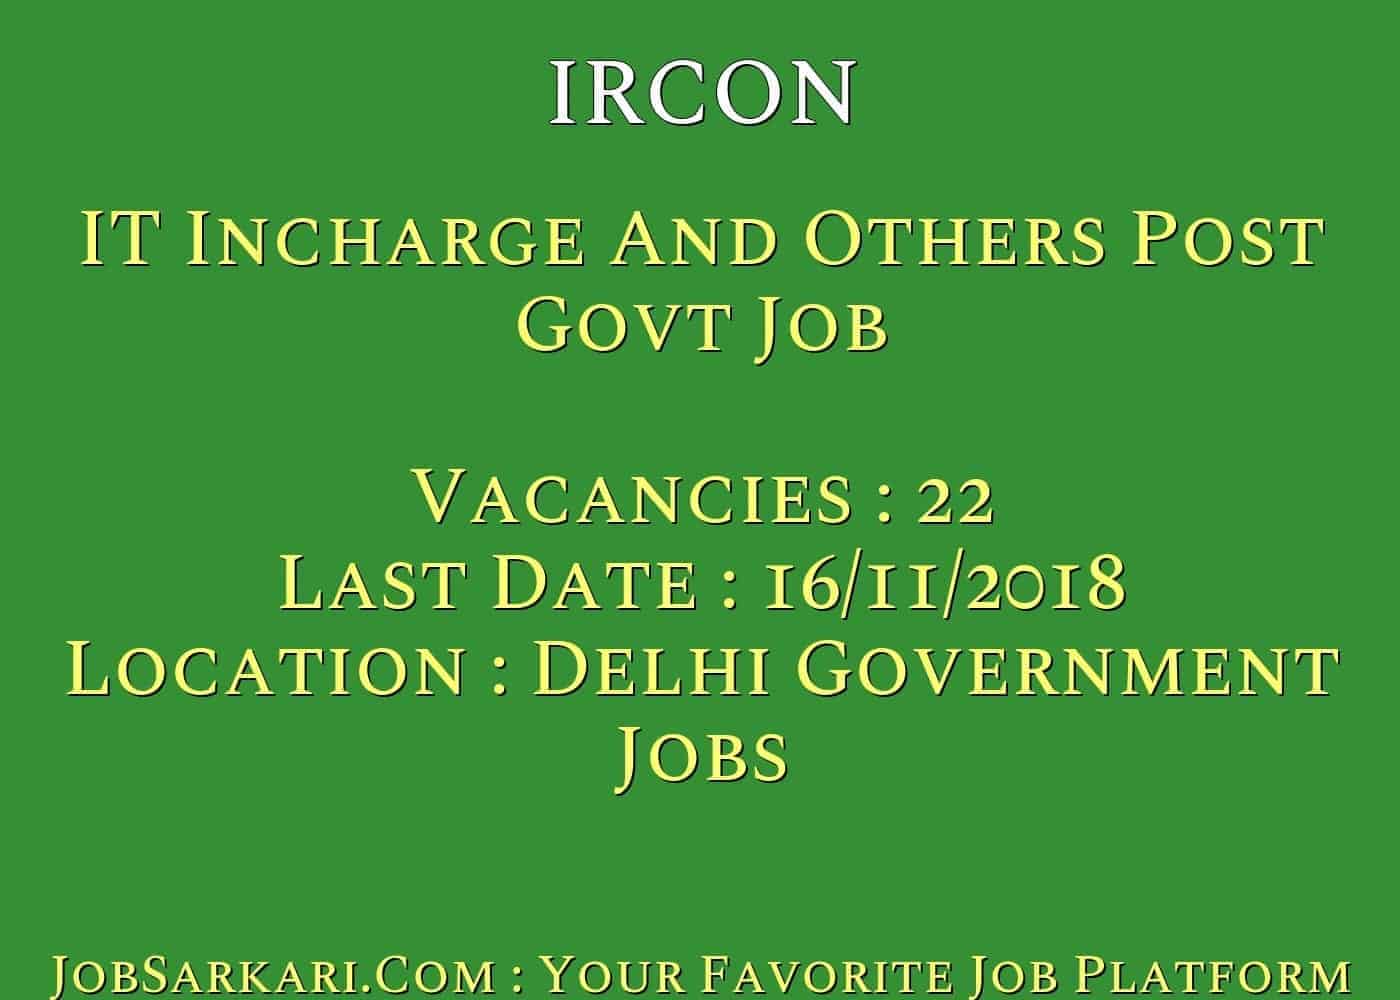 IRCON Recruitment 2018 For IT Incharge And Others Post Govt Job